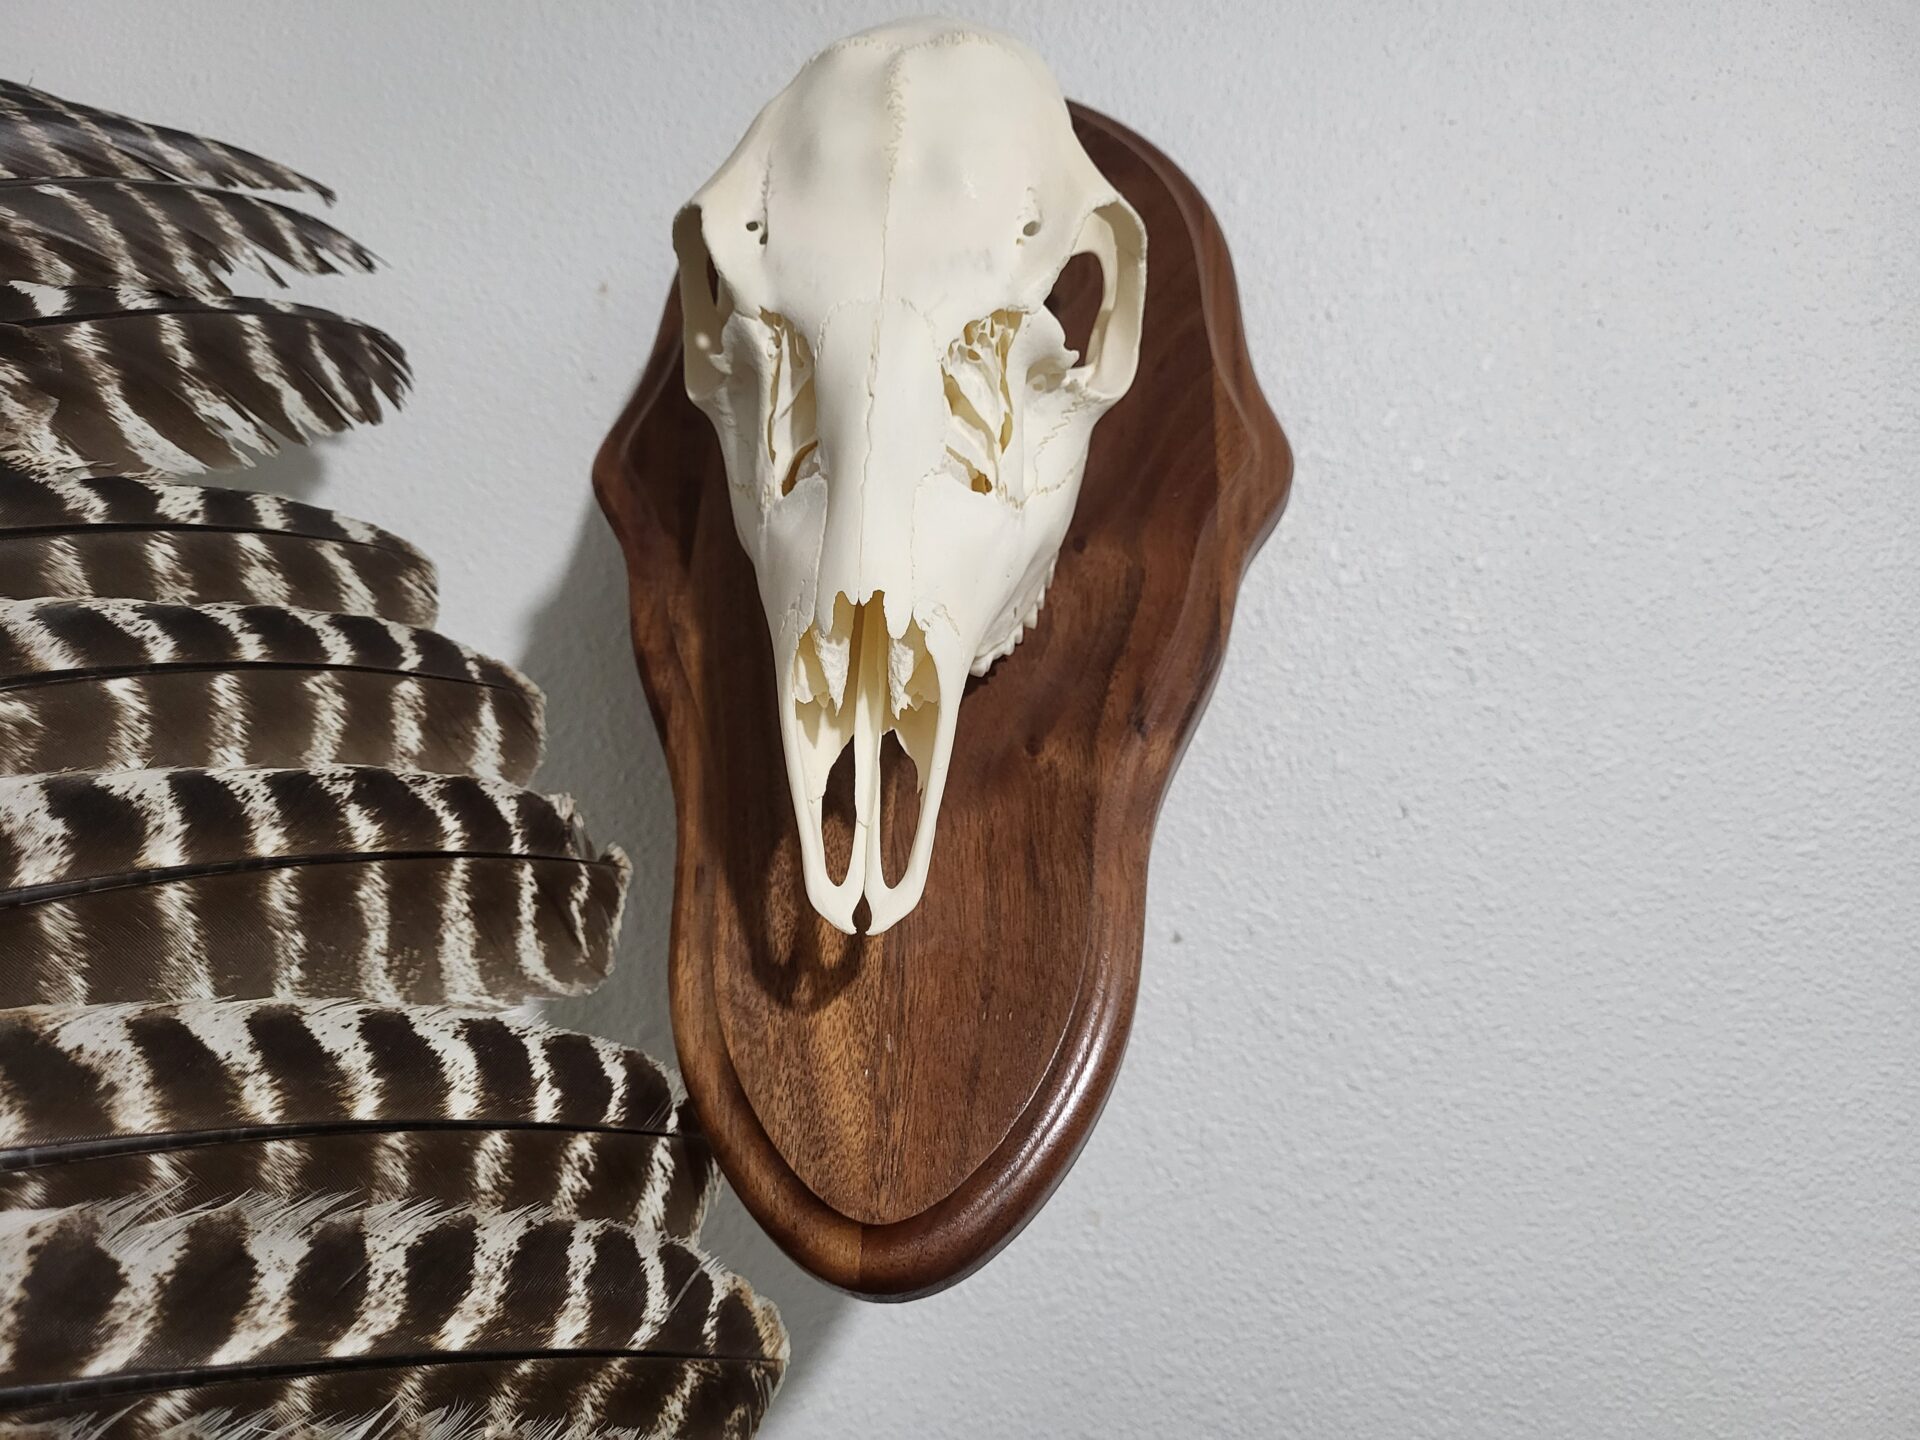 Animal skeletons are also available for sale